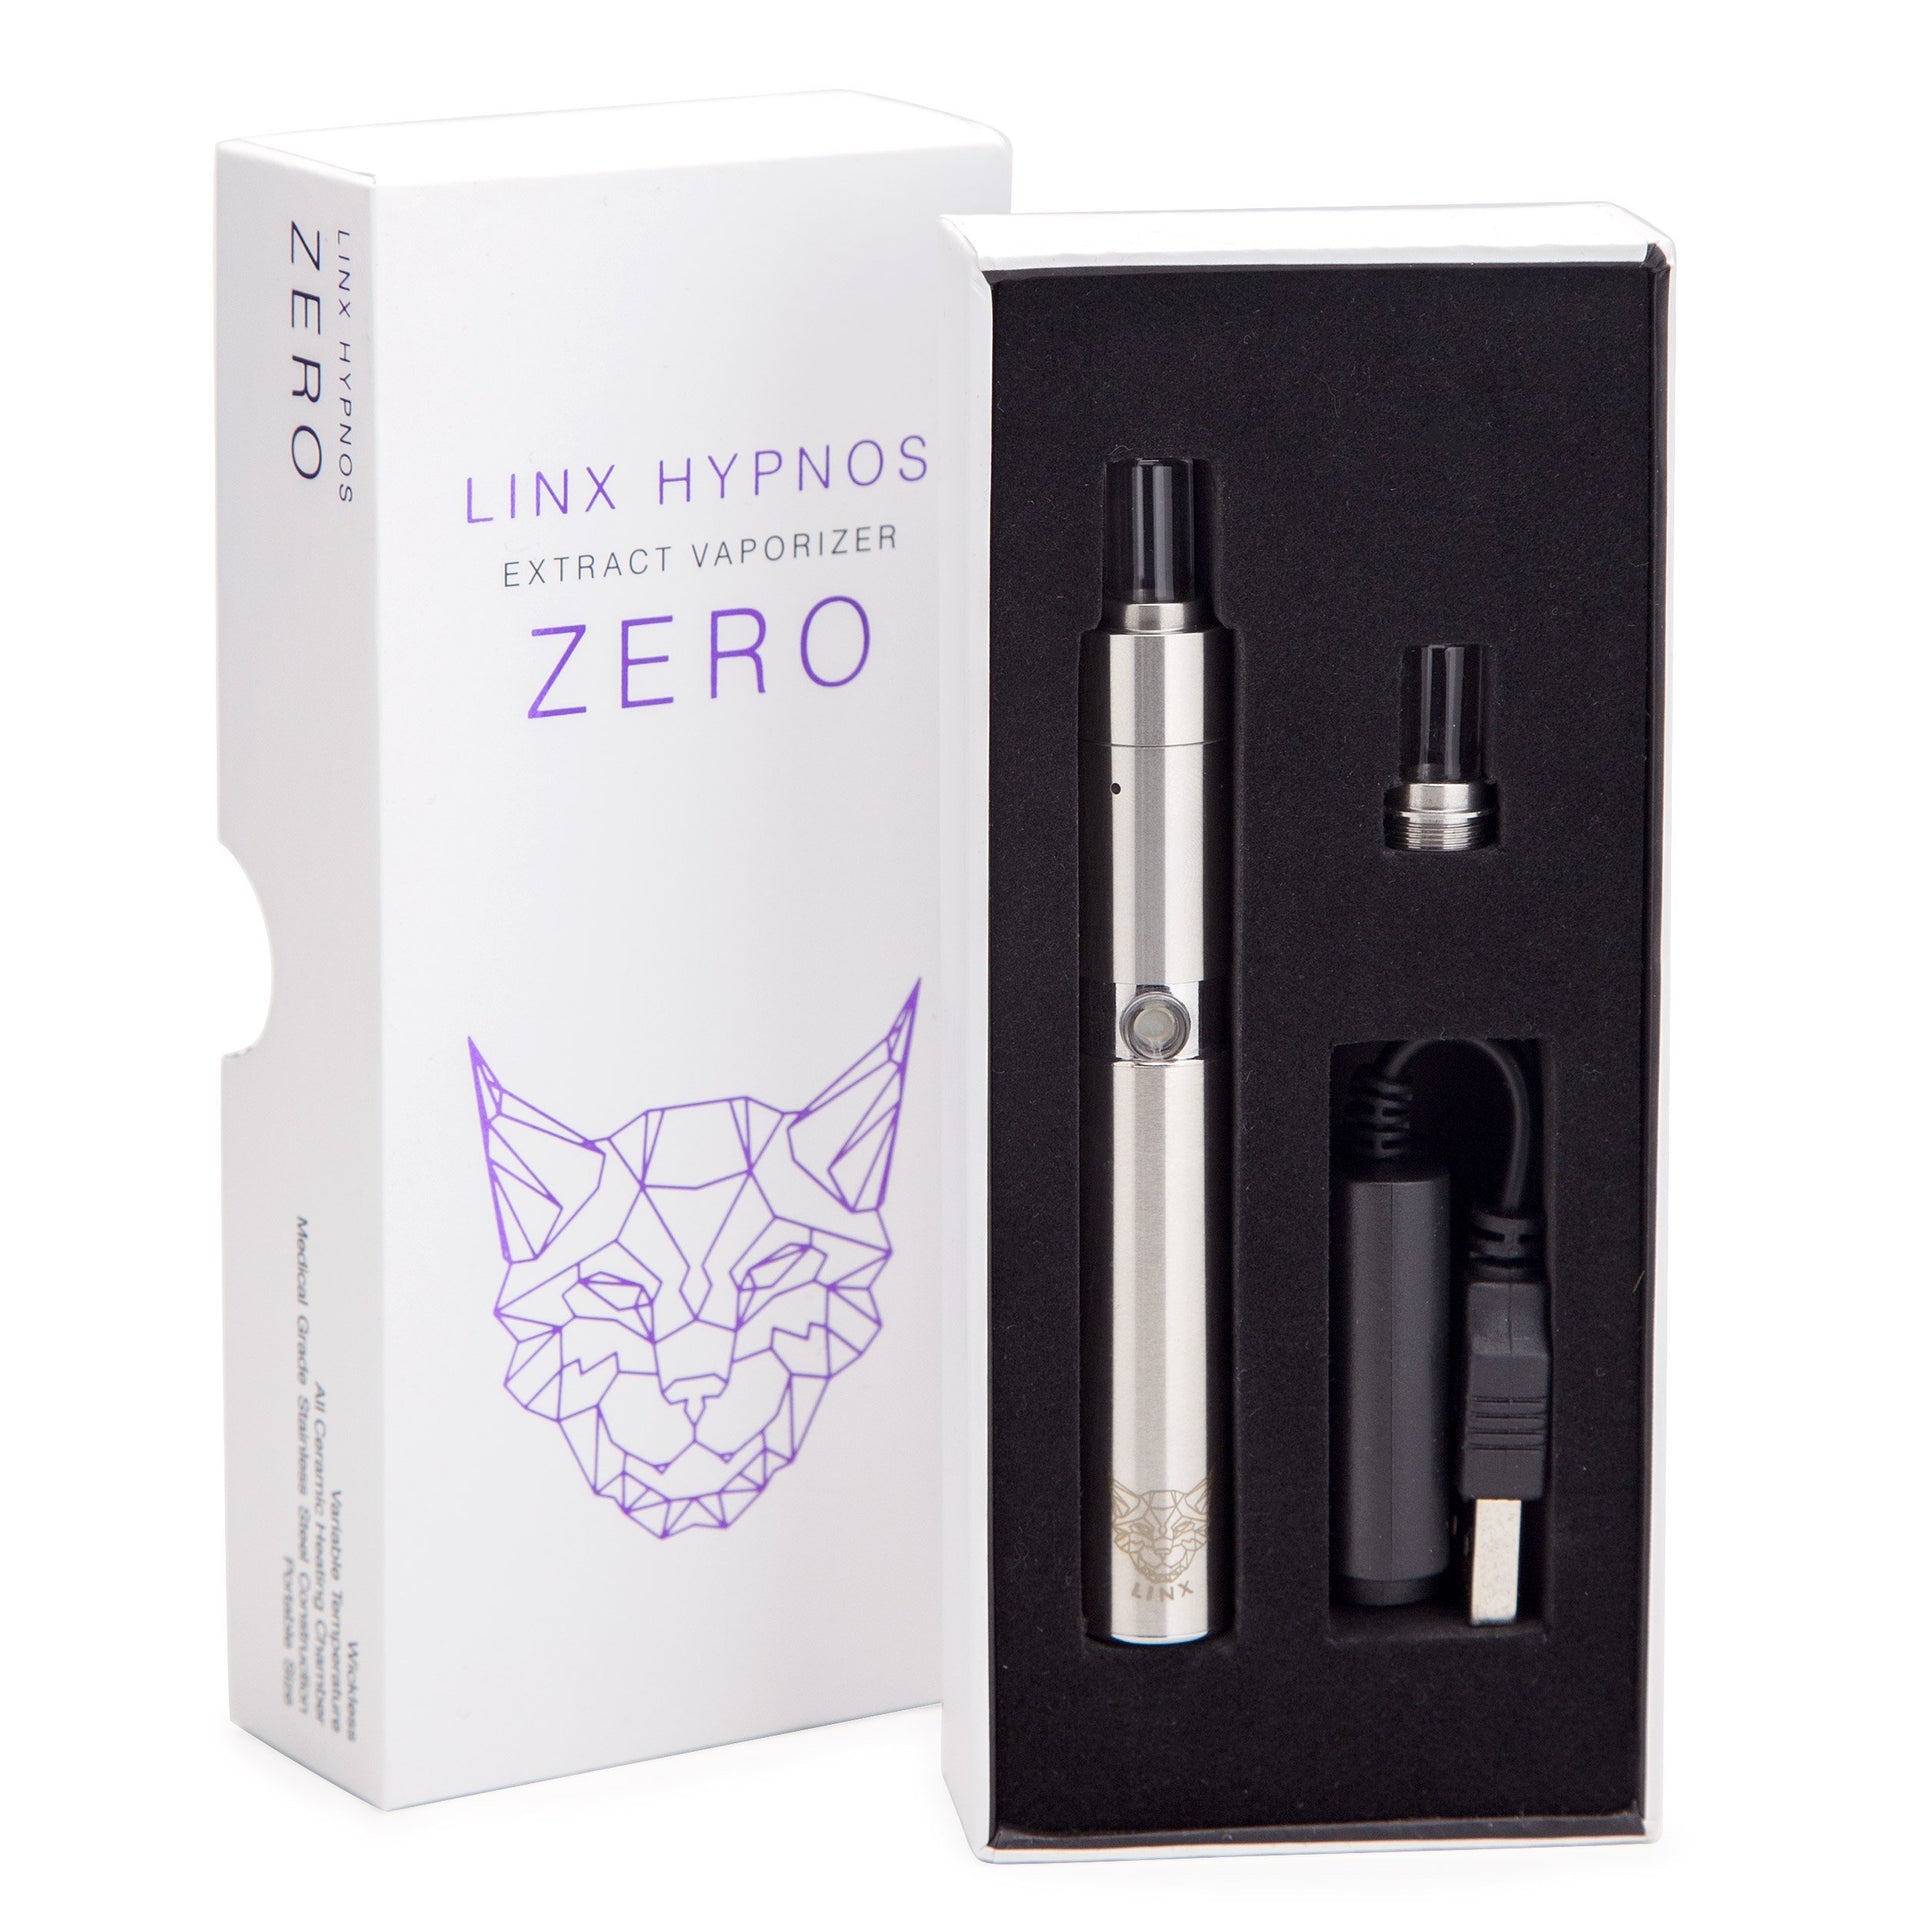 LINX Hypnos Zero, Ares, & Gaia Vape Special - 420 Science - The most trusted online smoke shop.